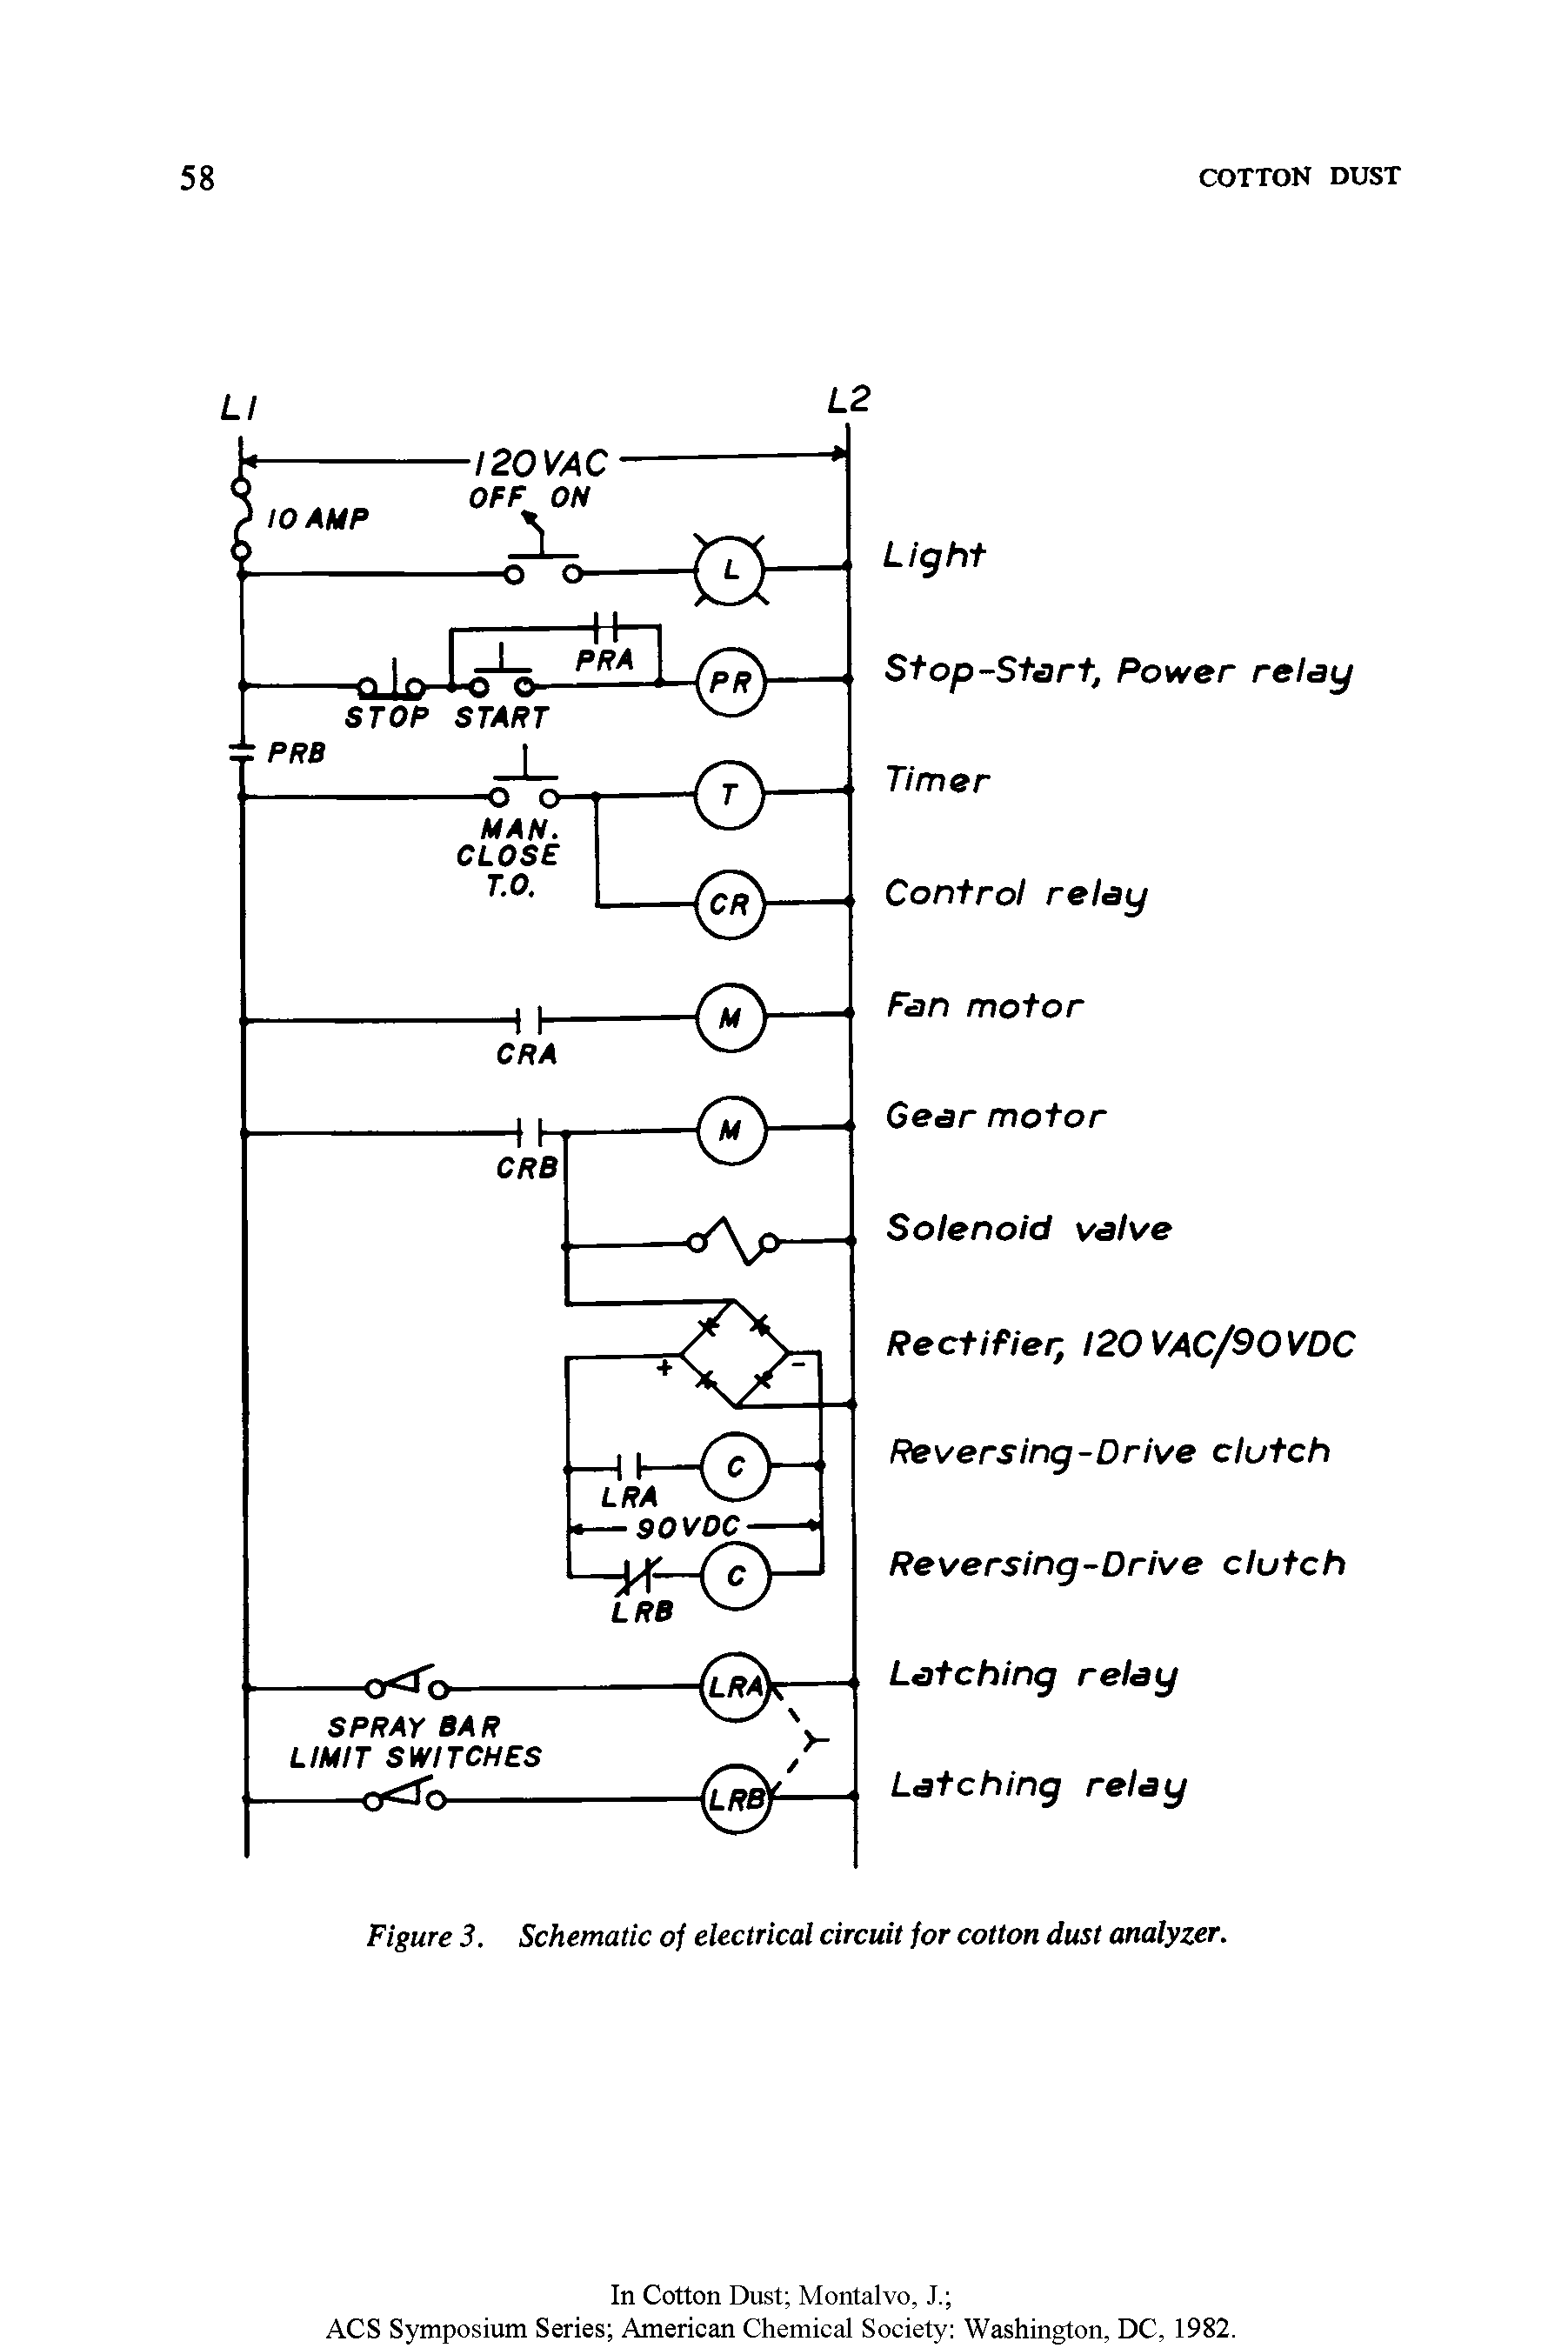 Figure 3. Schematic of electrical circuit for cotton dust analyzer.